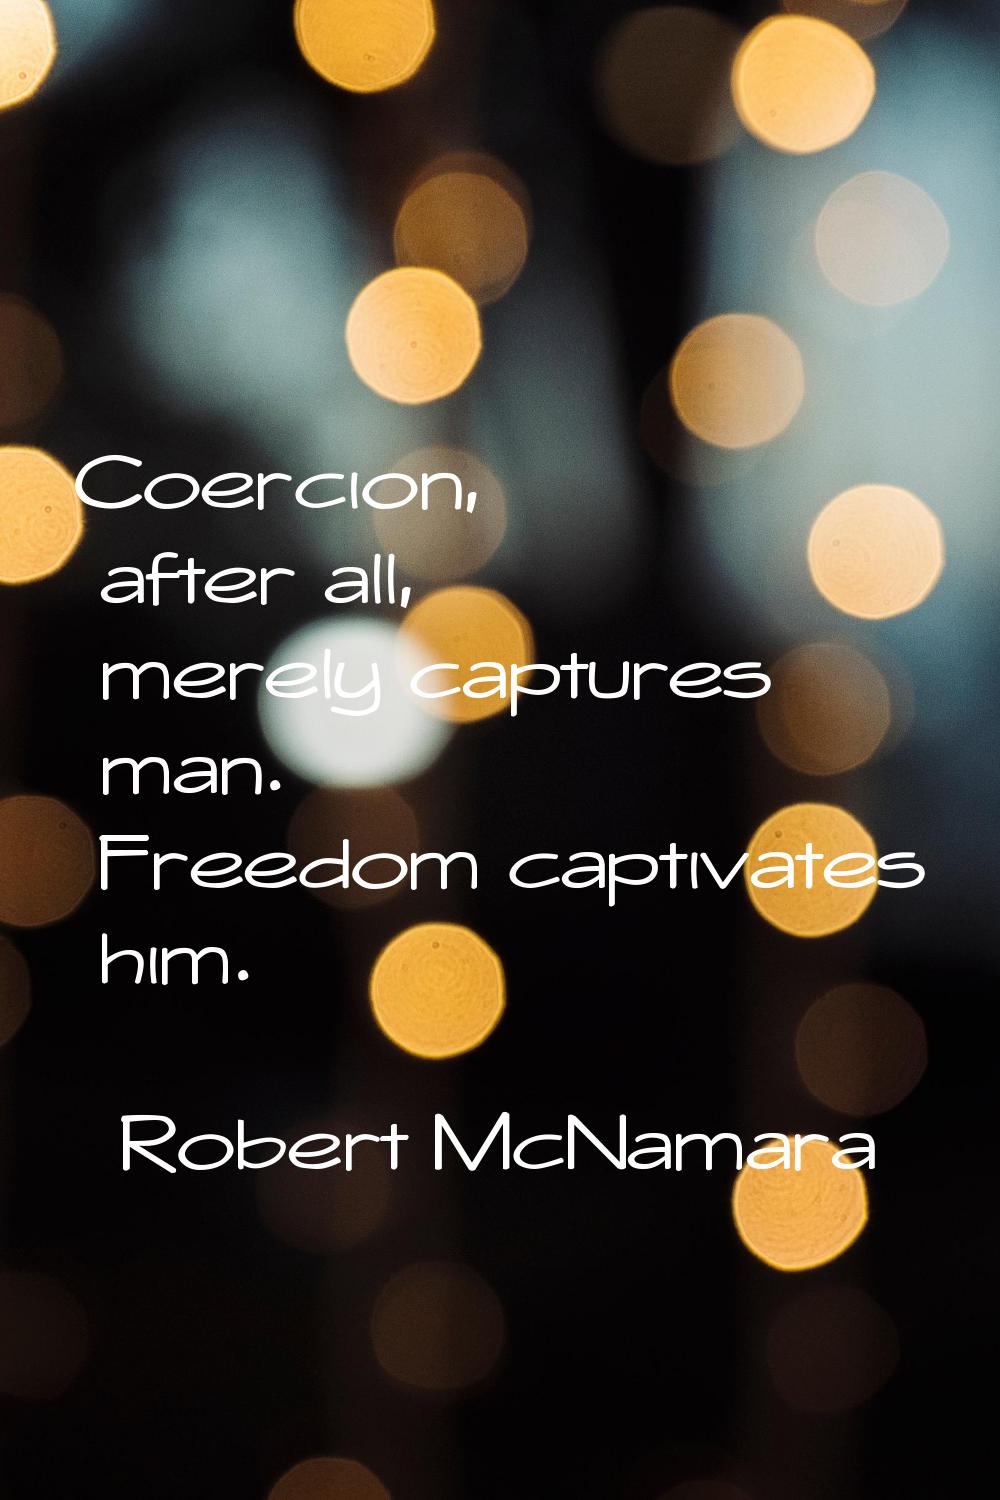 Coercion, after all, merely captures man. Freedom captivates him.